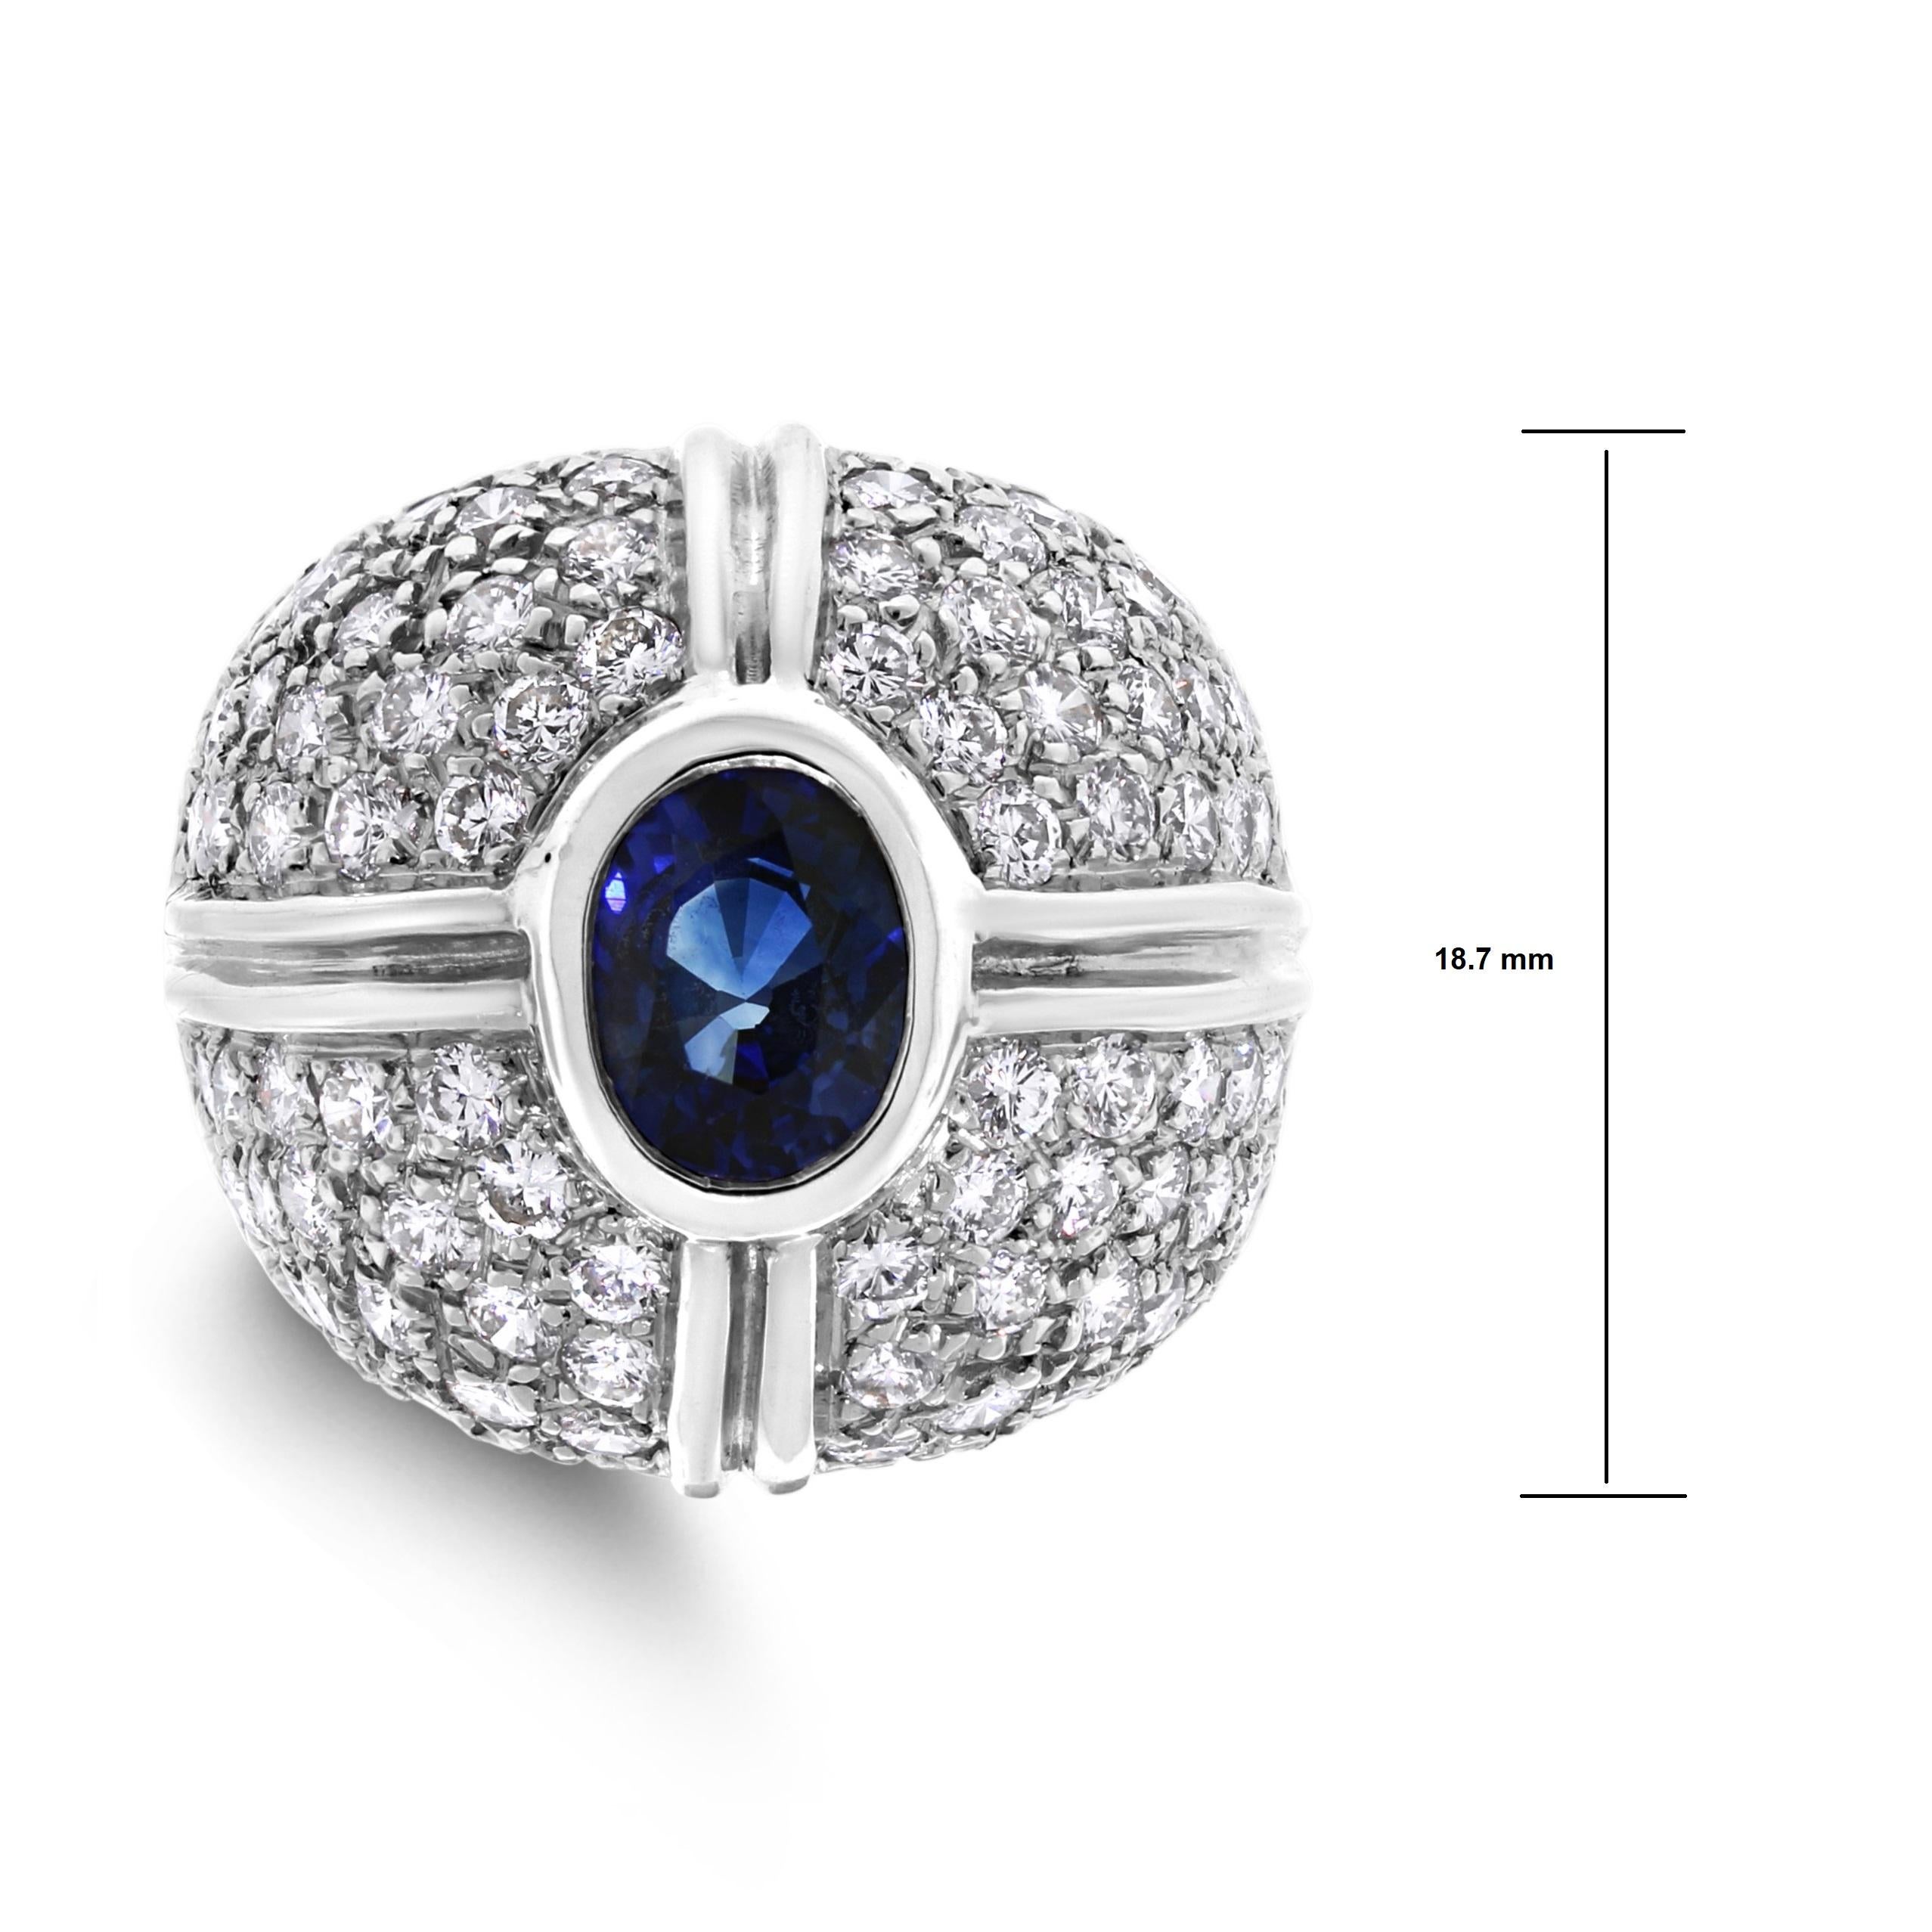 Starry Crossroads Diamond and Sapphire Dome Fashion Ring in White Gold In New Condition For Sale In New York, NY